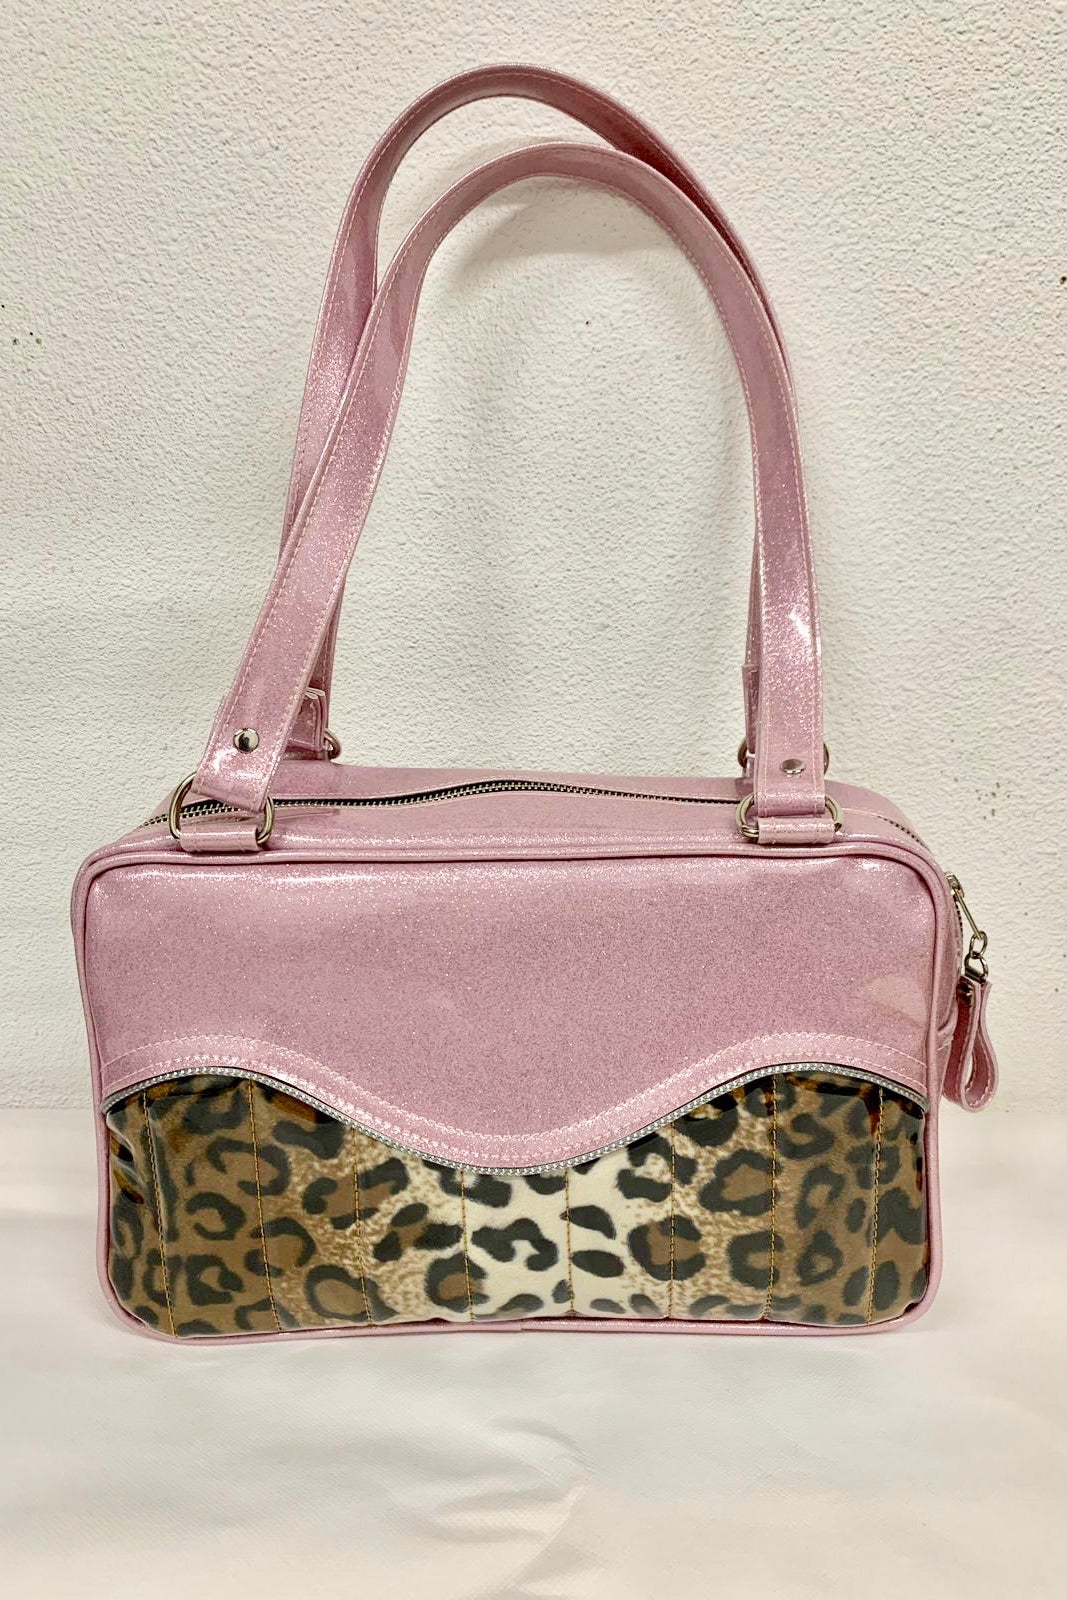 Tuck and Roll Tote Bag - Leopard with Clear Overlay / Blush Pink Glitter Vinyl - Leopard Lining